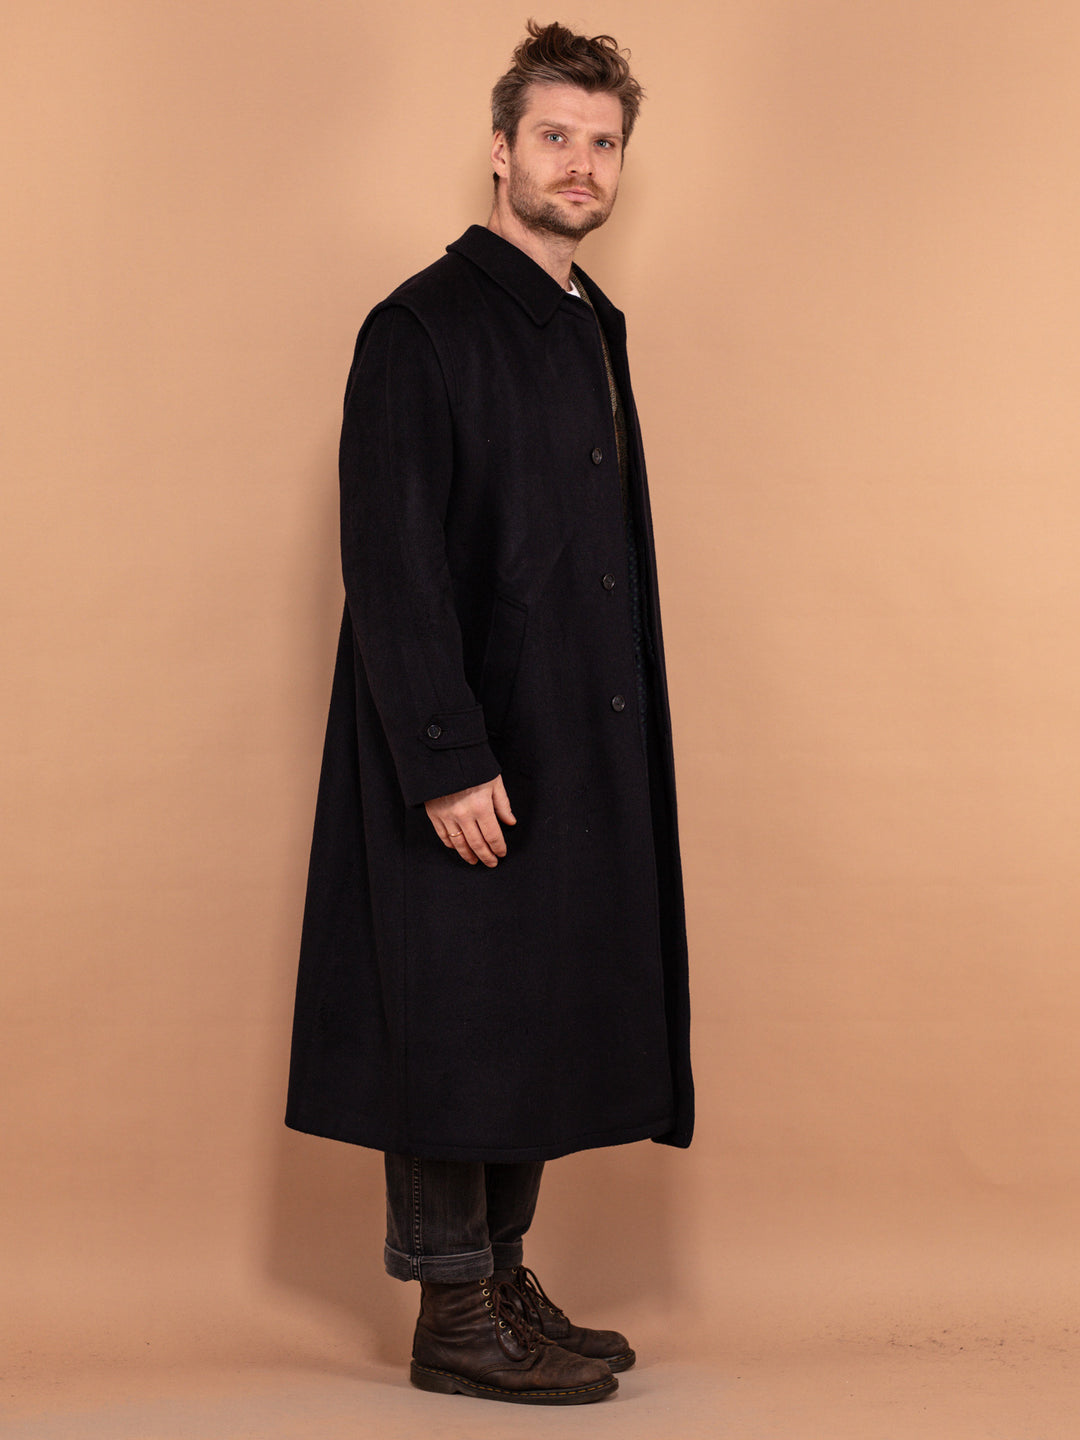 Loden Wool Overcoat 90's, Size XL Large, Vintage Virgin Wool Winter Coat, Classic Navy Blue Coat, Mens Tyrolean Clothing, Made in Austria